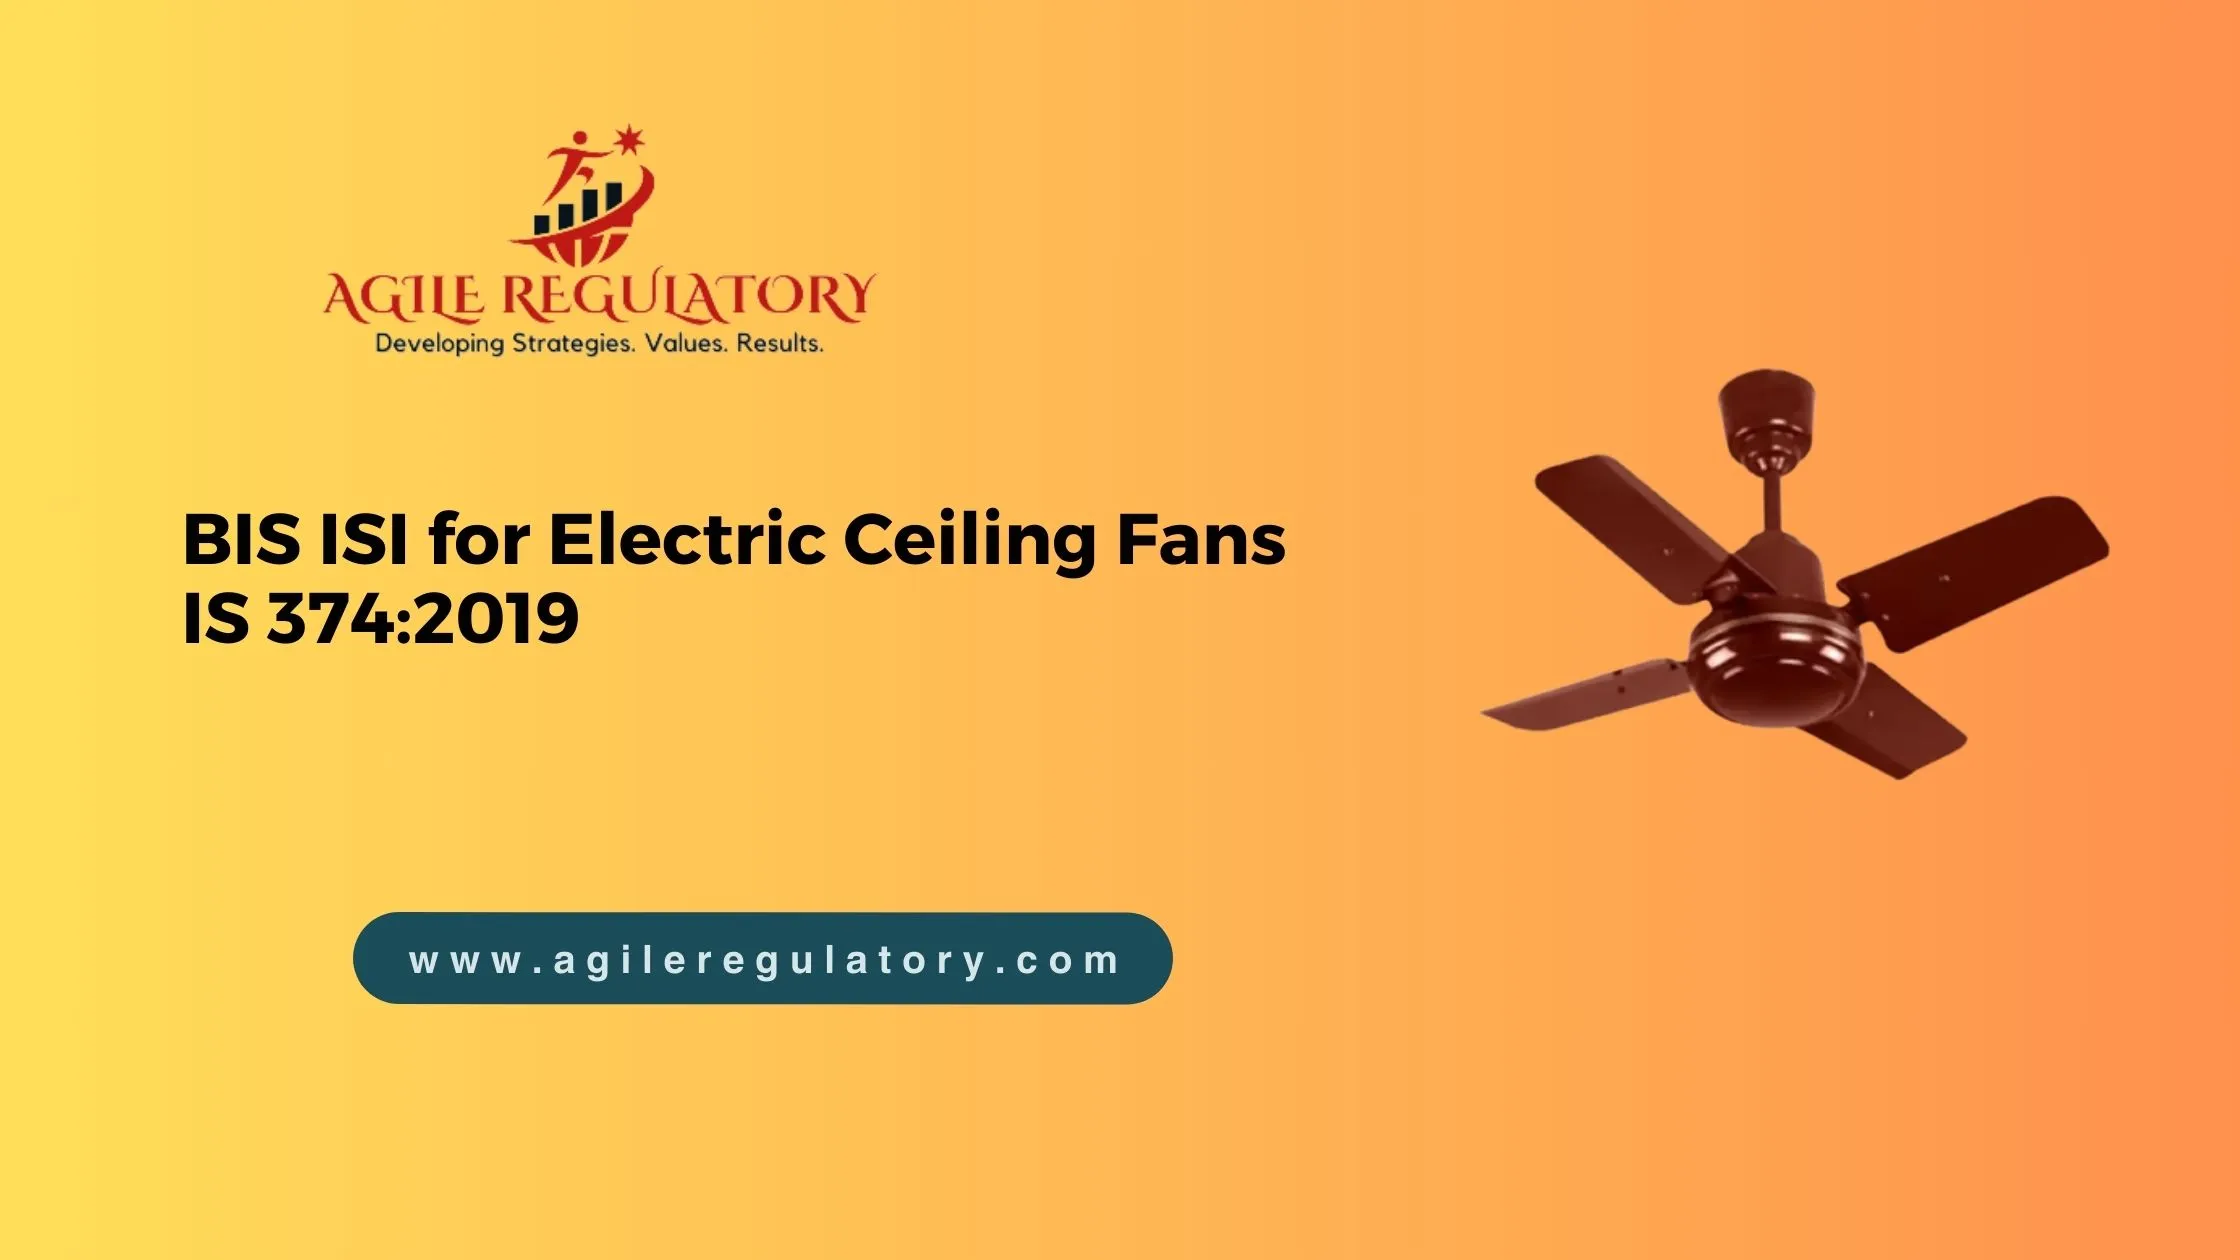 BIS for Electric Ceiling Fans IS 374:2019